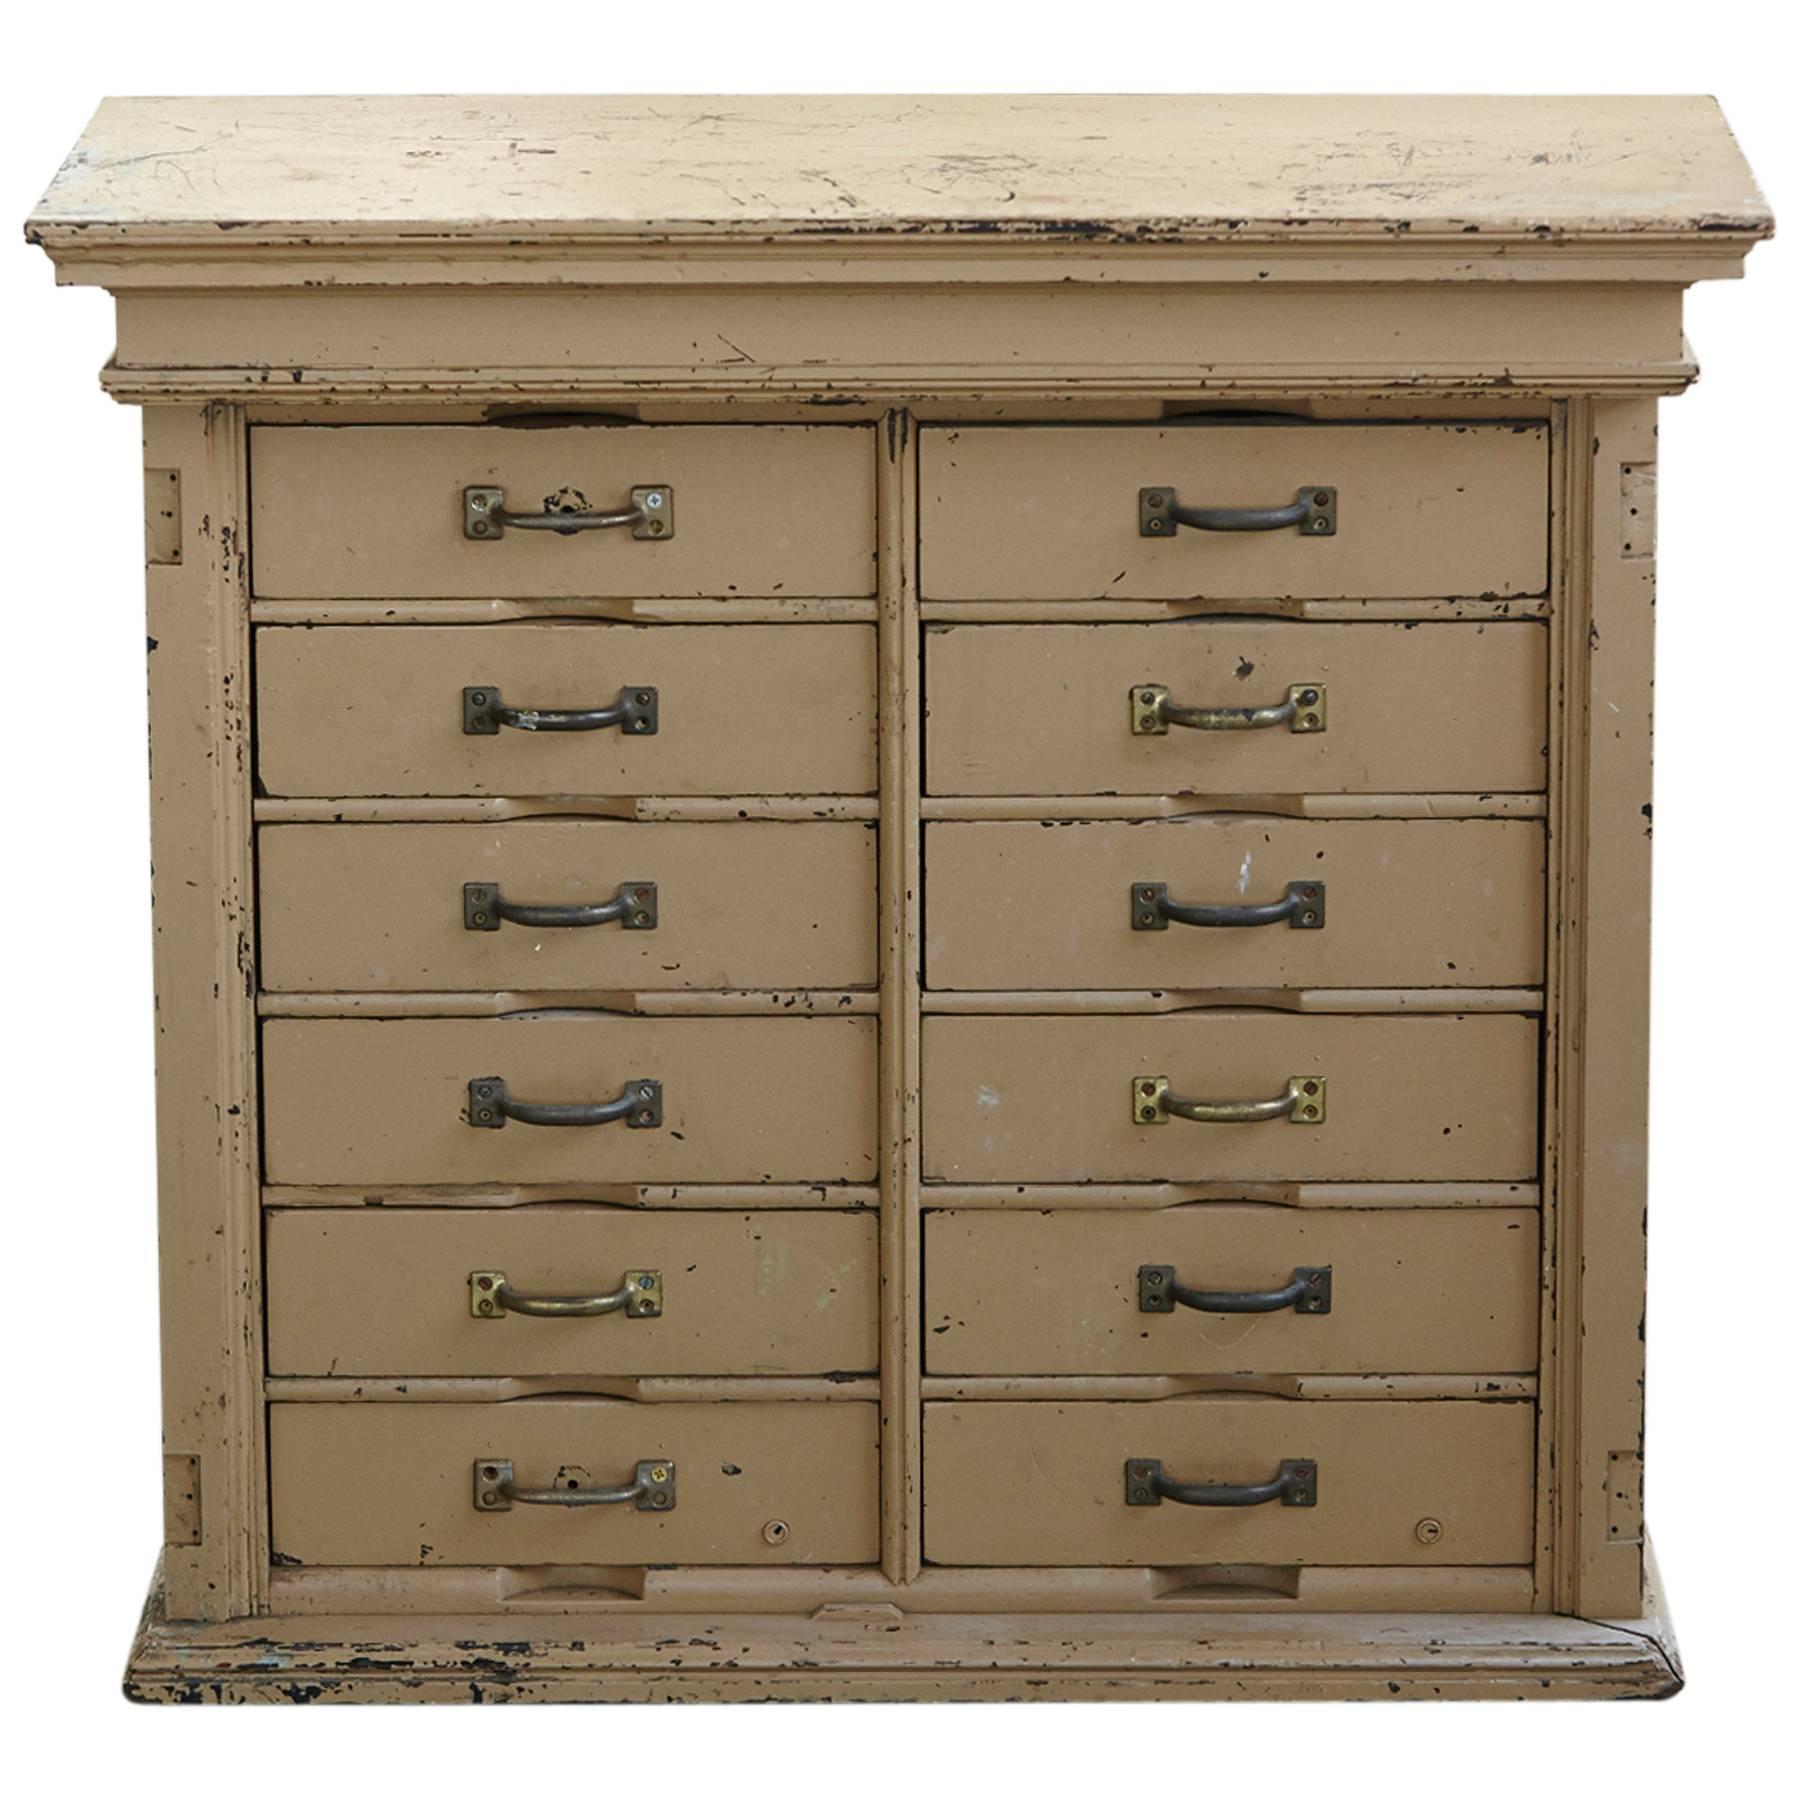 Original Paint 12-Drawer Cabinet in a Distressed Look